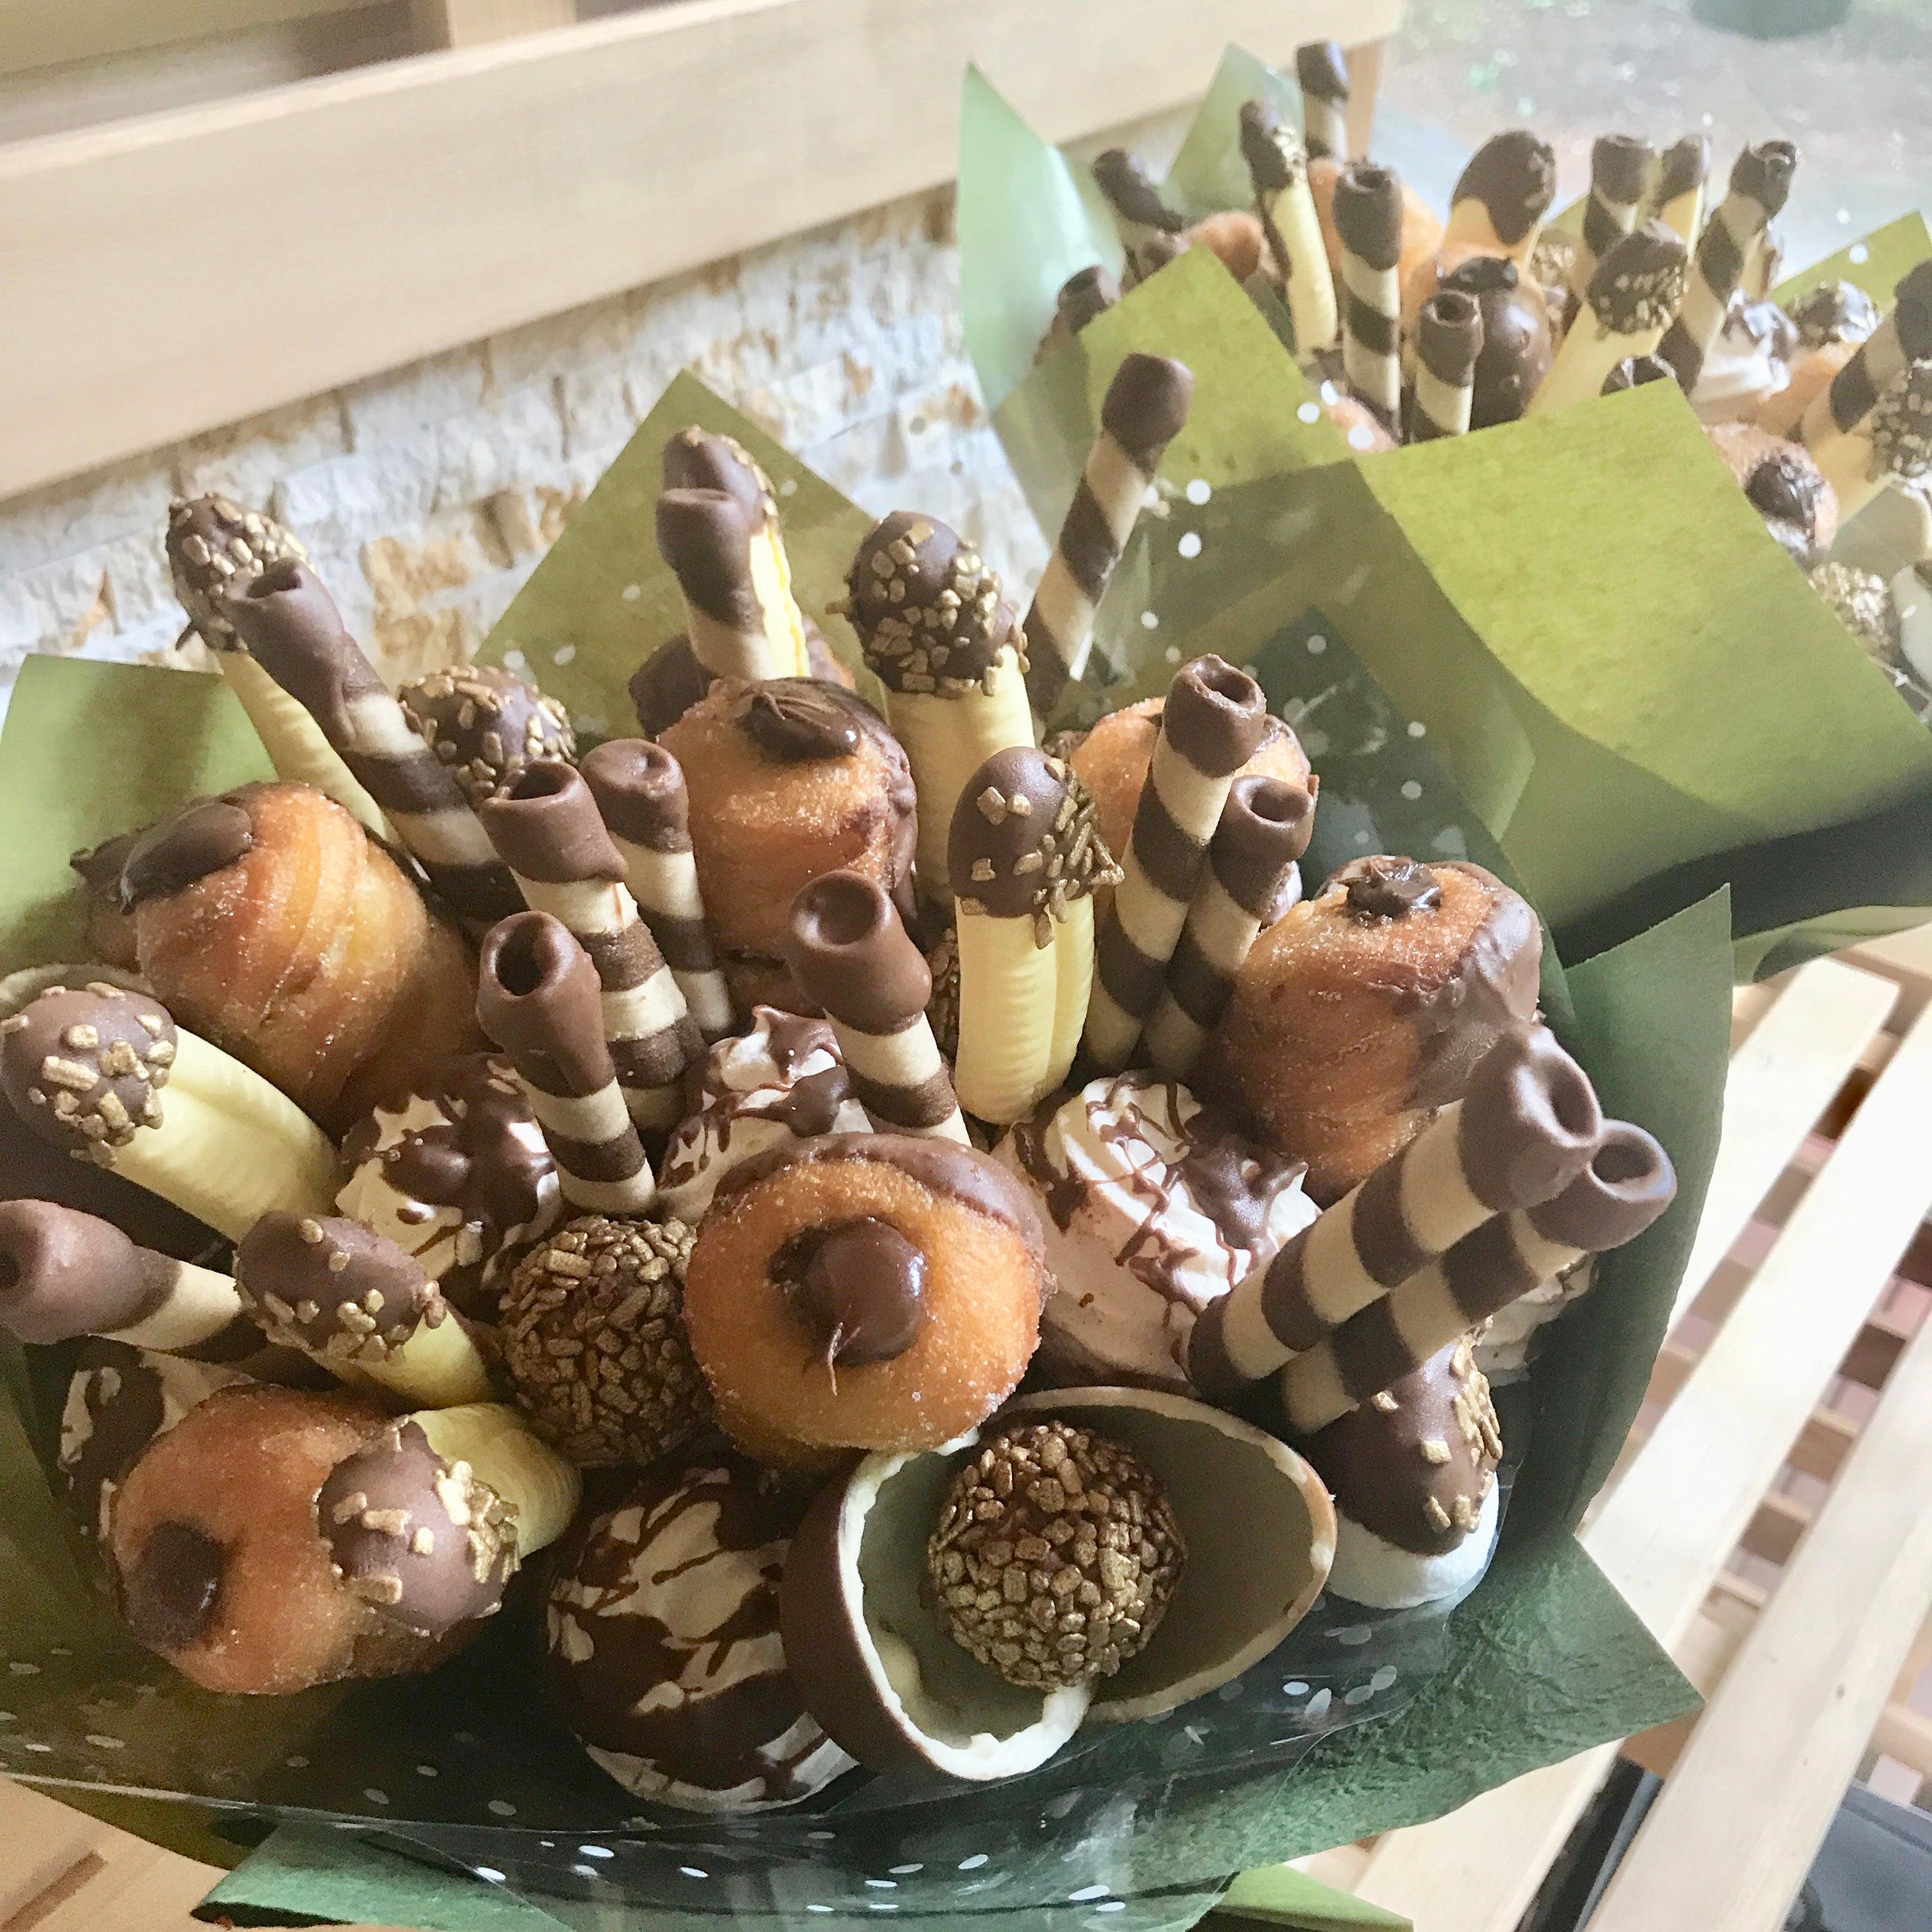 50SIXSONE Dessert Bouquet W/24K Gold Sprinkles Is As Extra As It Sounds